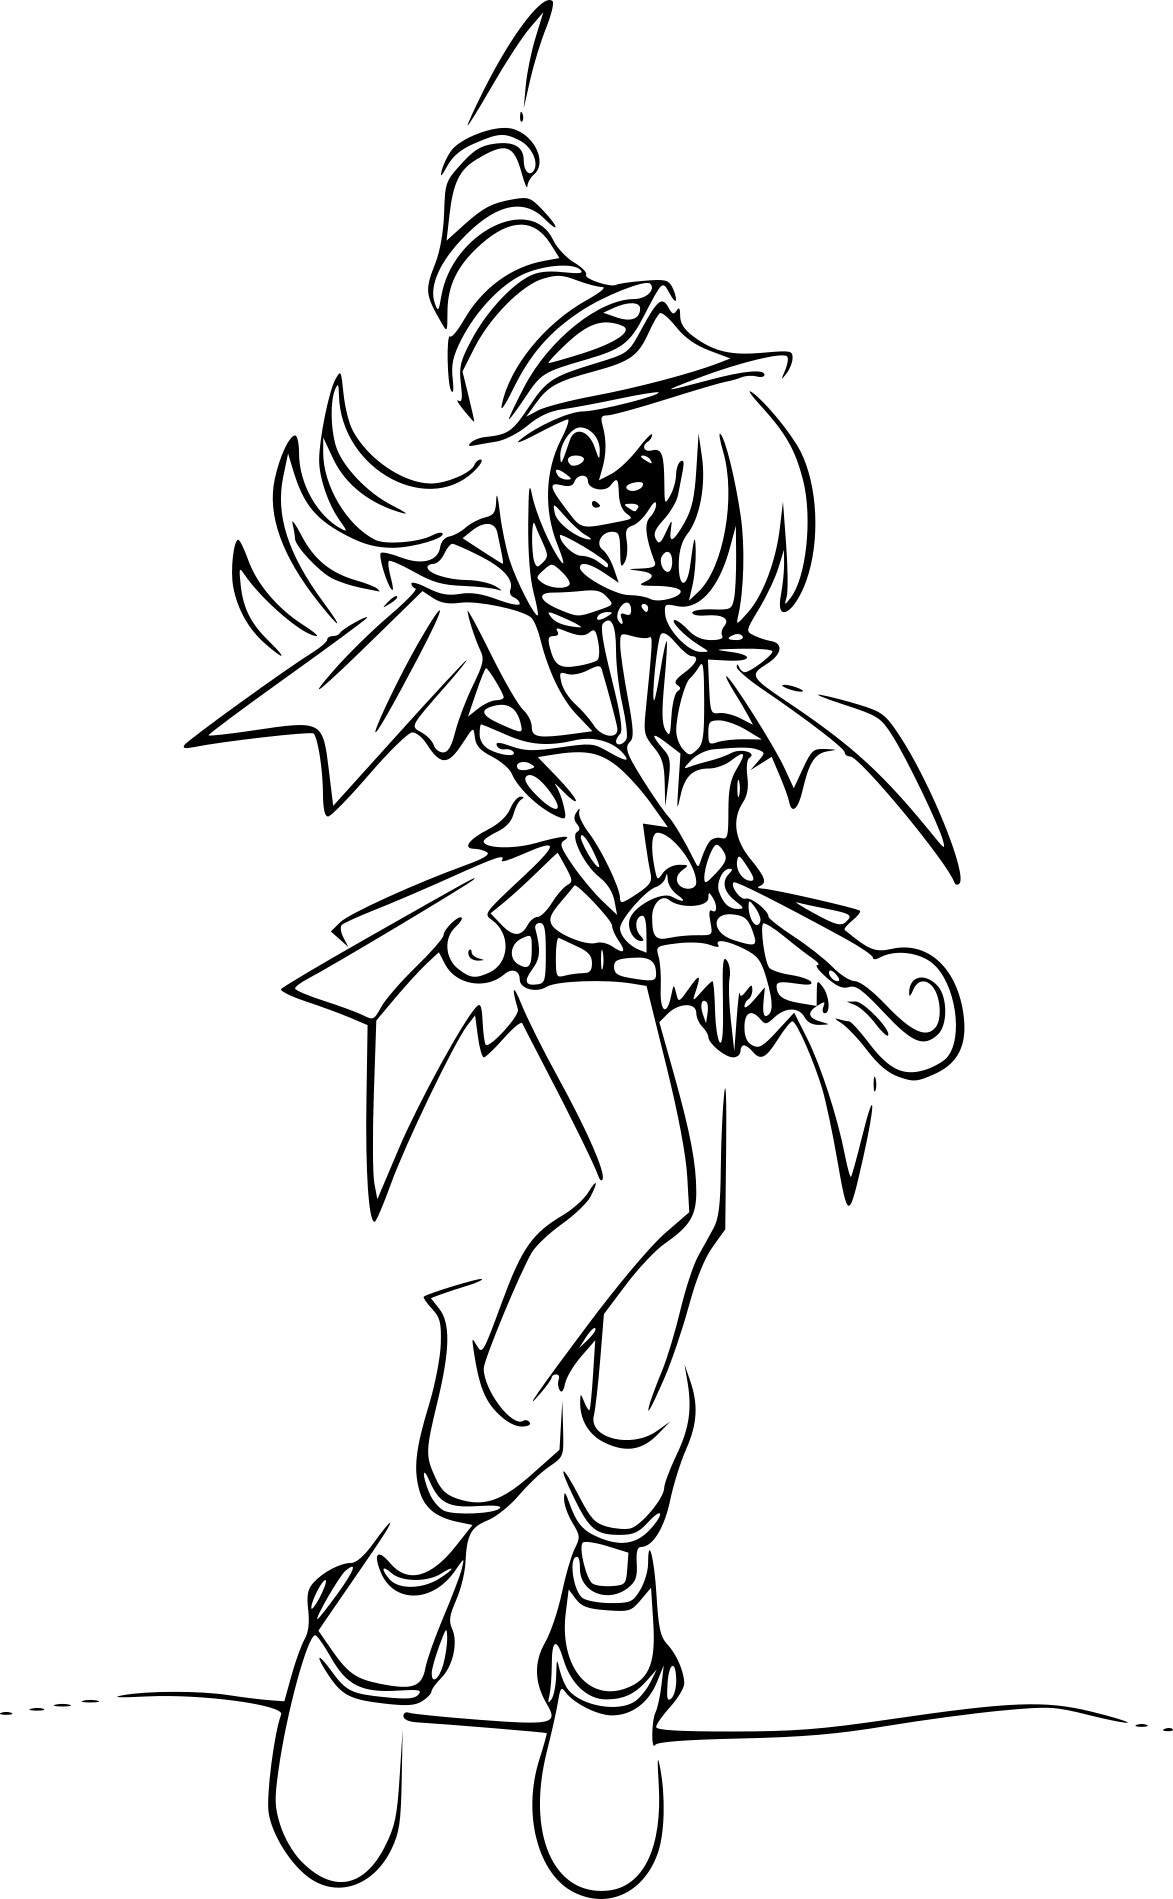 Yu Gi Ohs Dark Magician coloring page